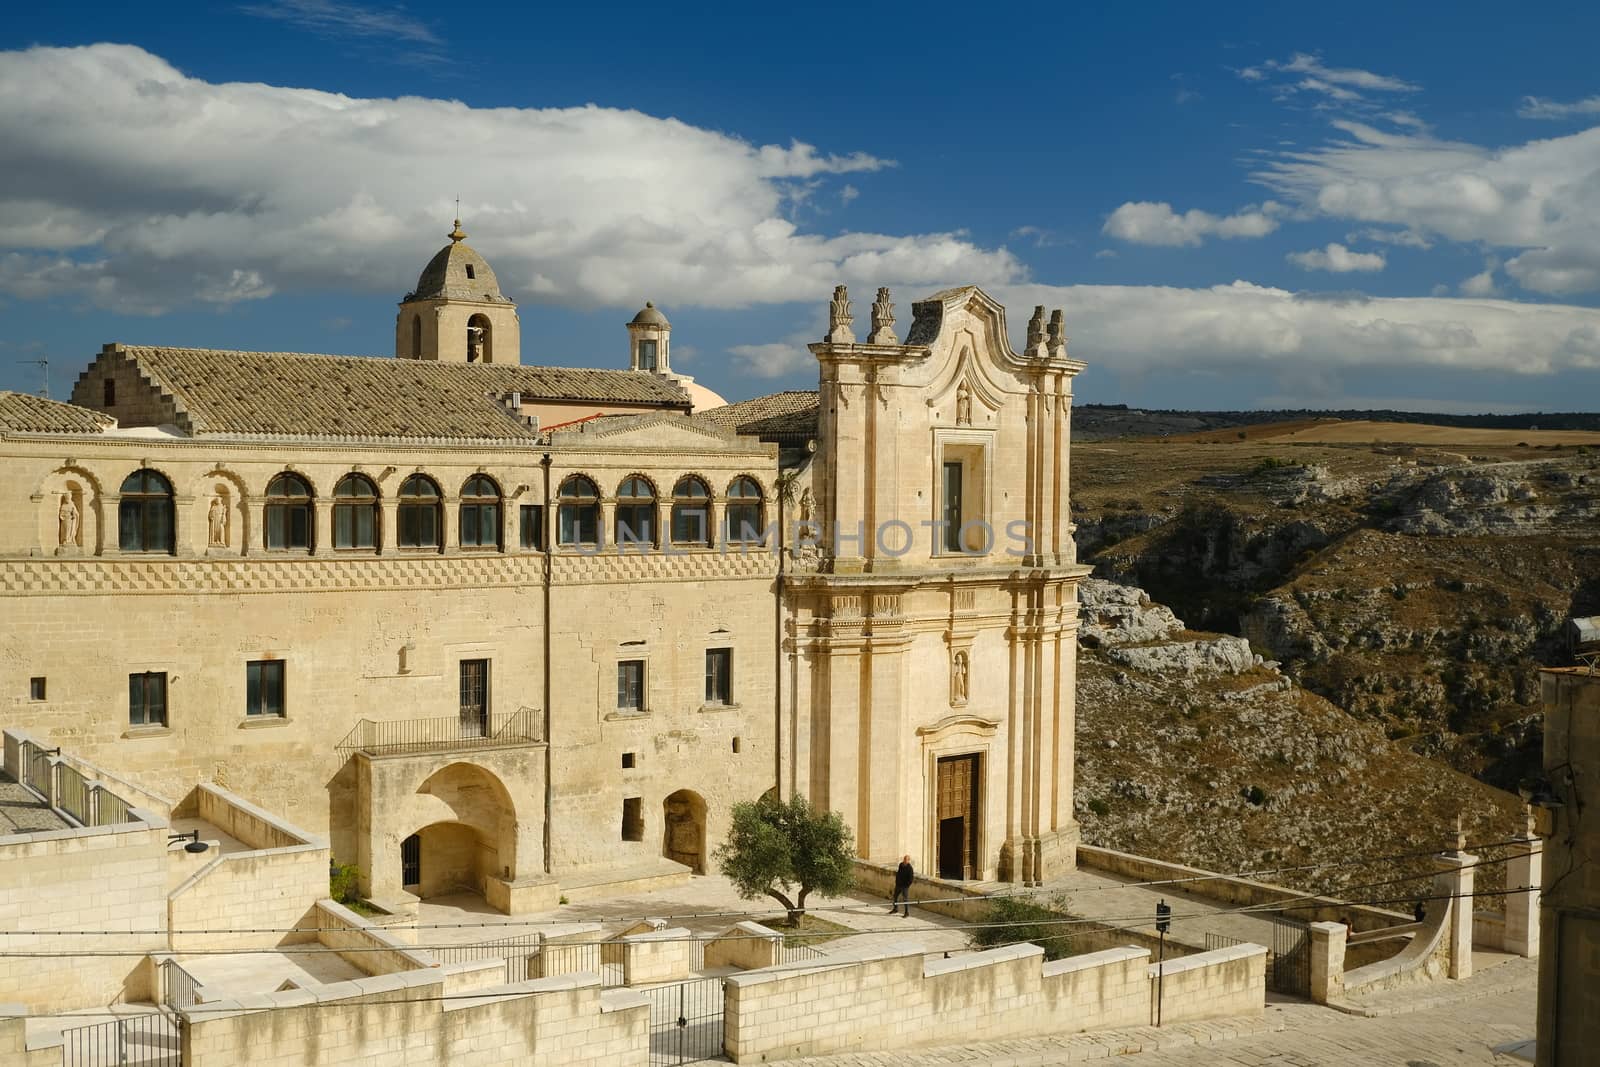 Matera, Italy. About 11/2019. Convent and church of Sant'Agostino in Matera. Beige stone facade